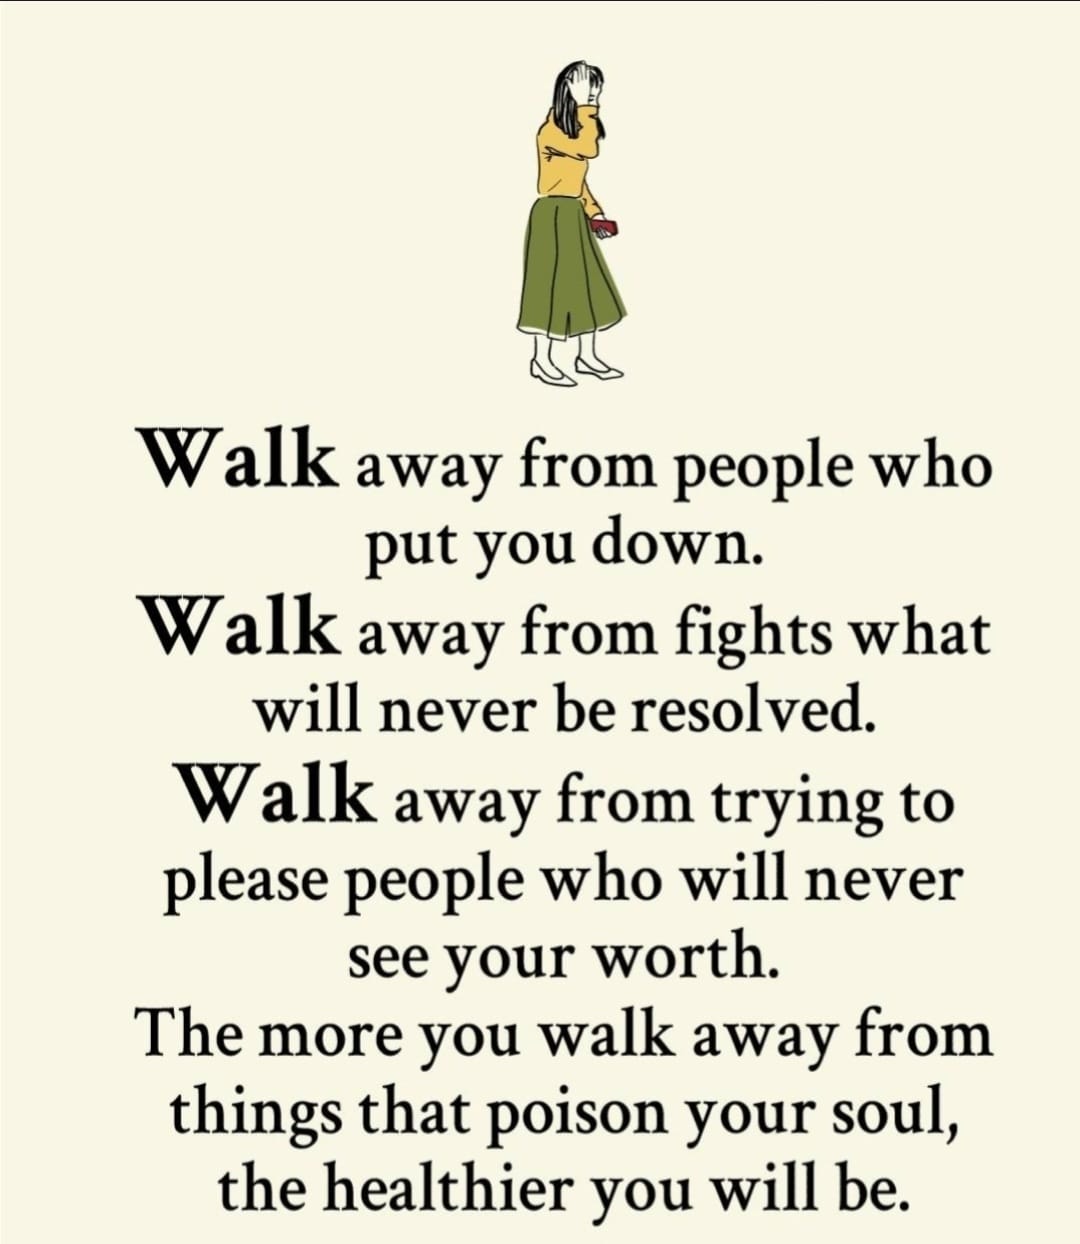 Walk away from people who put you down